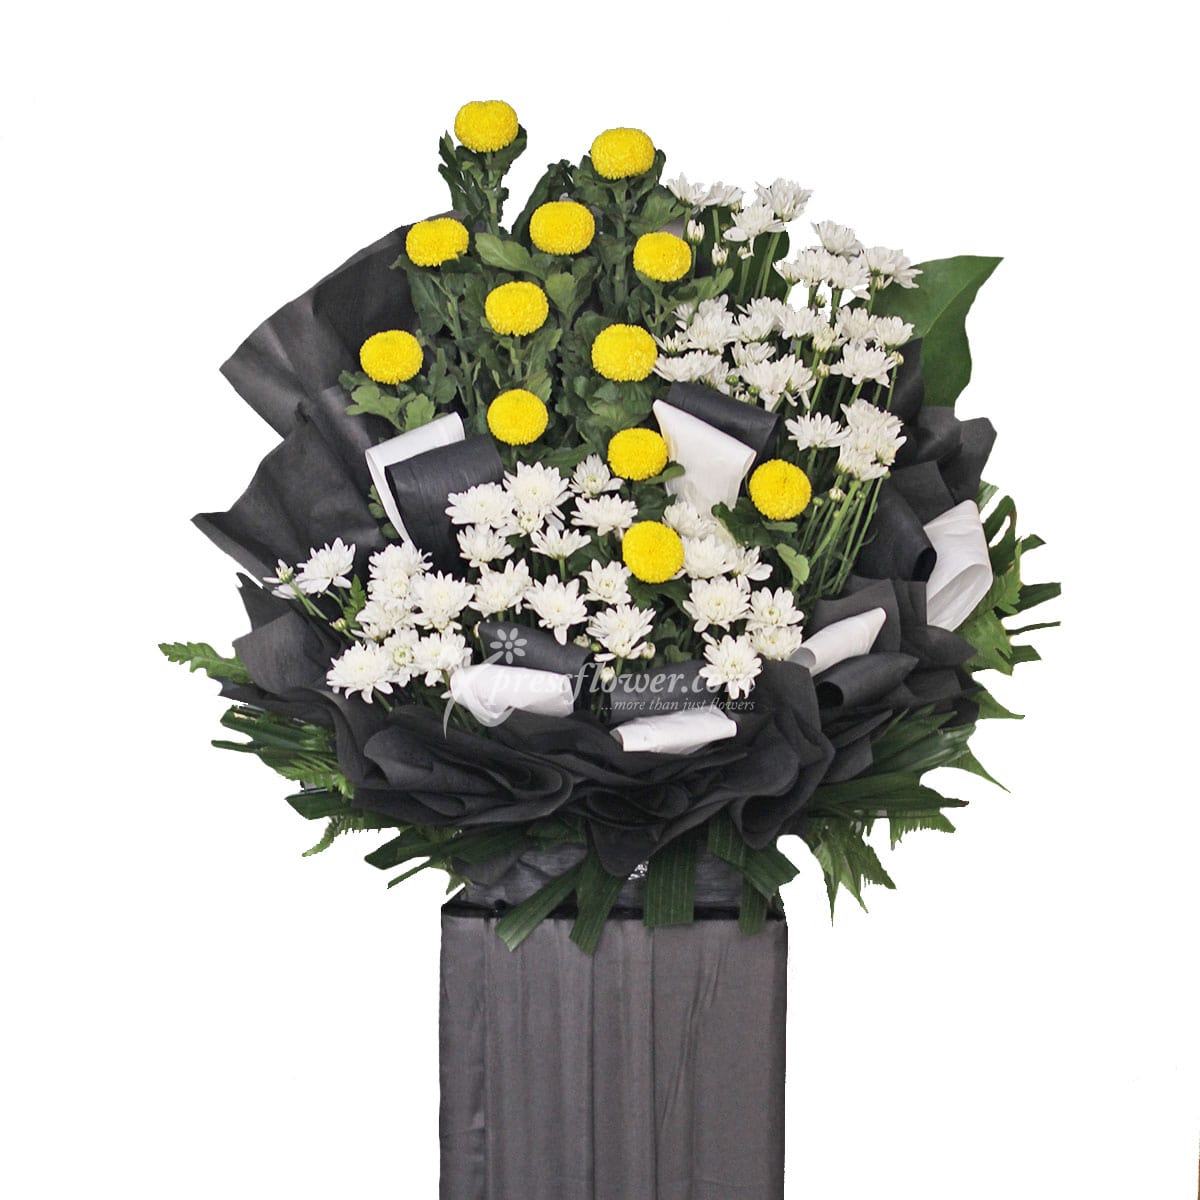 Mournful Course (Funeral Condolence Flower Wreath)